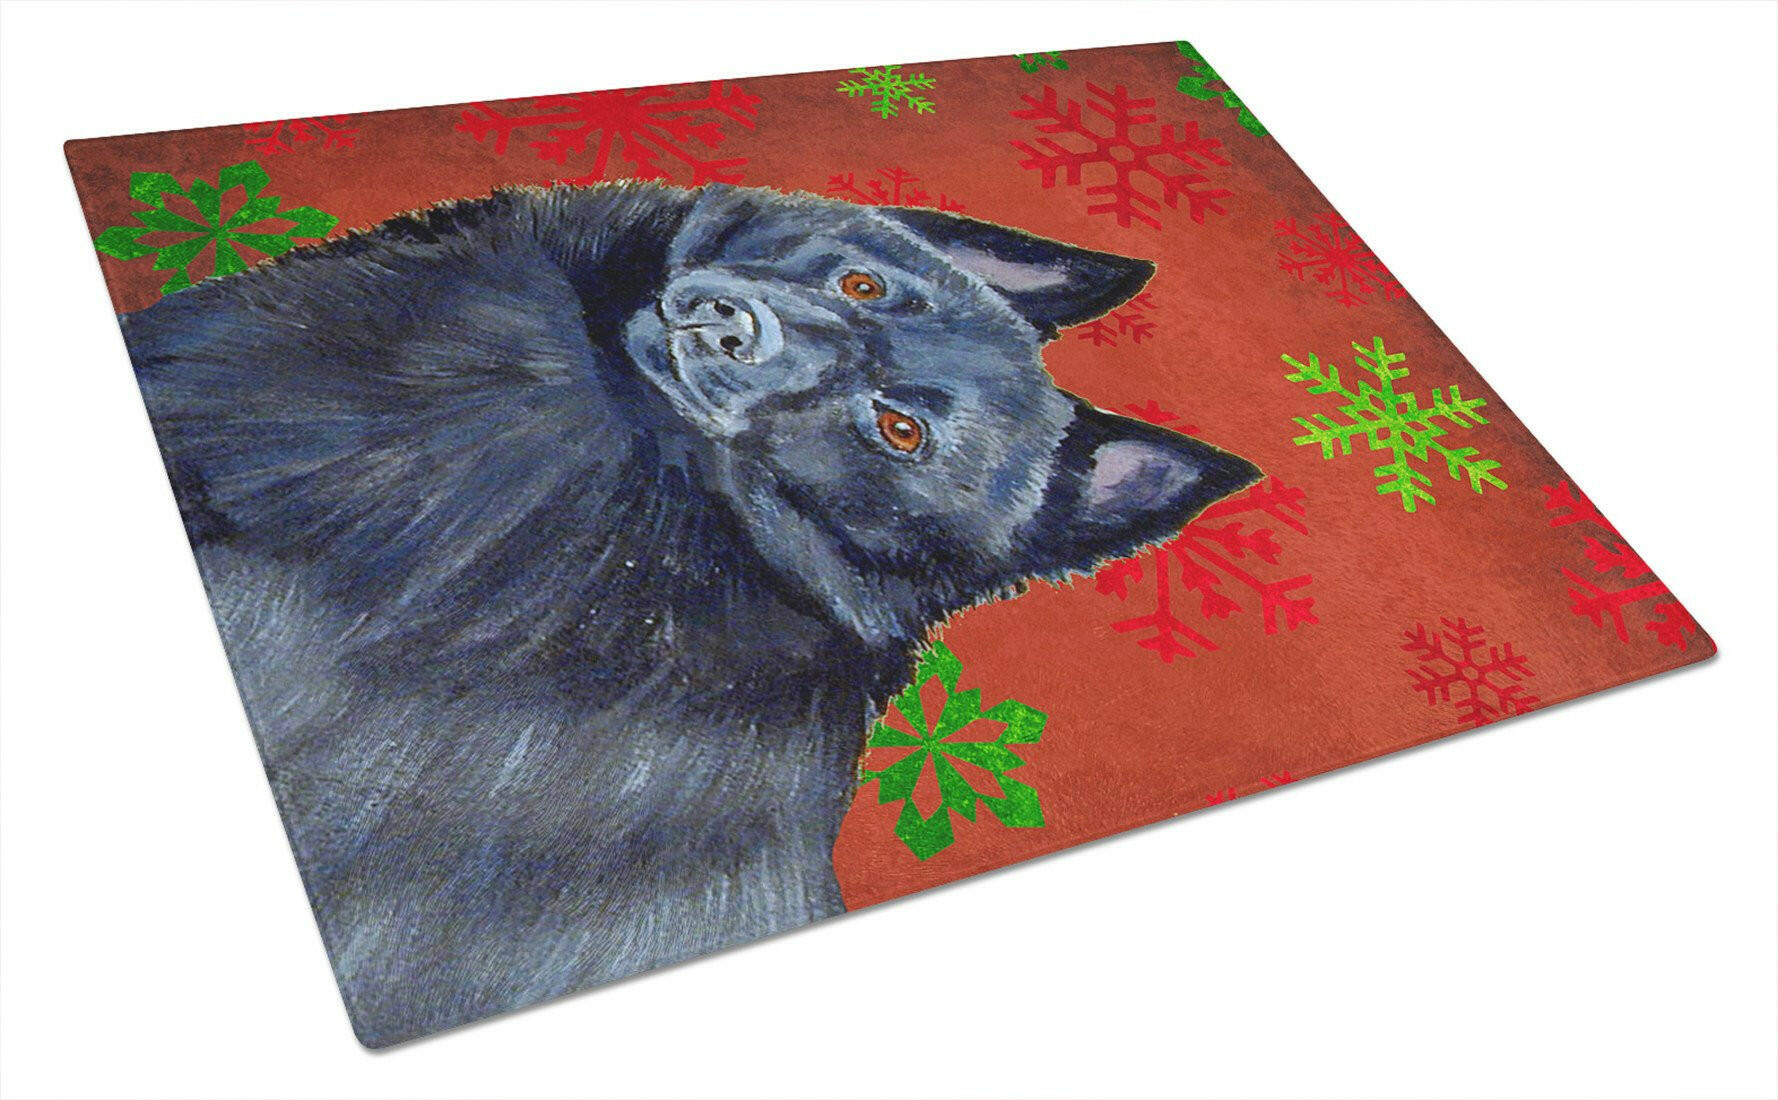 Schipperke Red and Green Snowflakes Holiday Christmas Glass Cutting Board Large by Caroline's Treasures